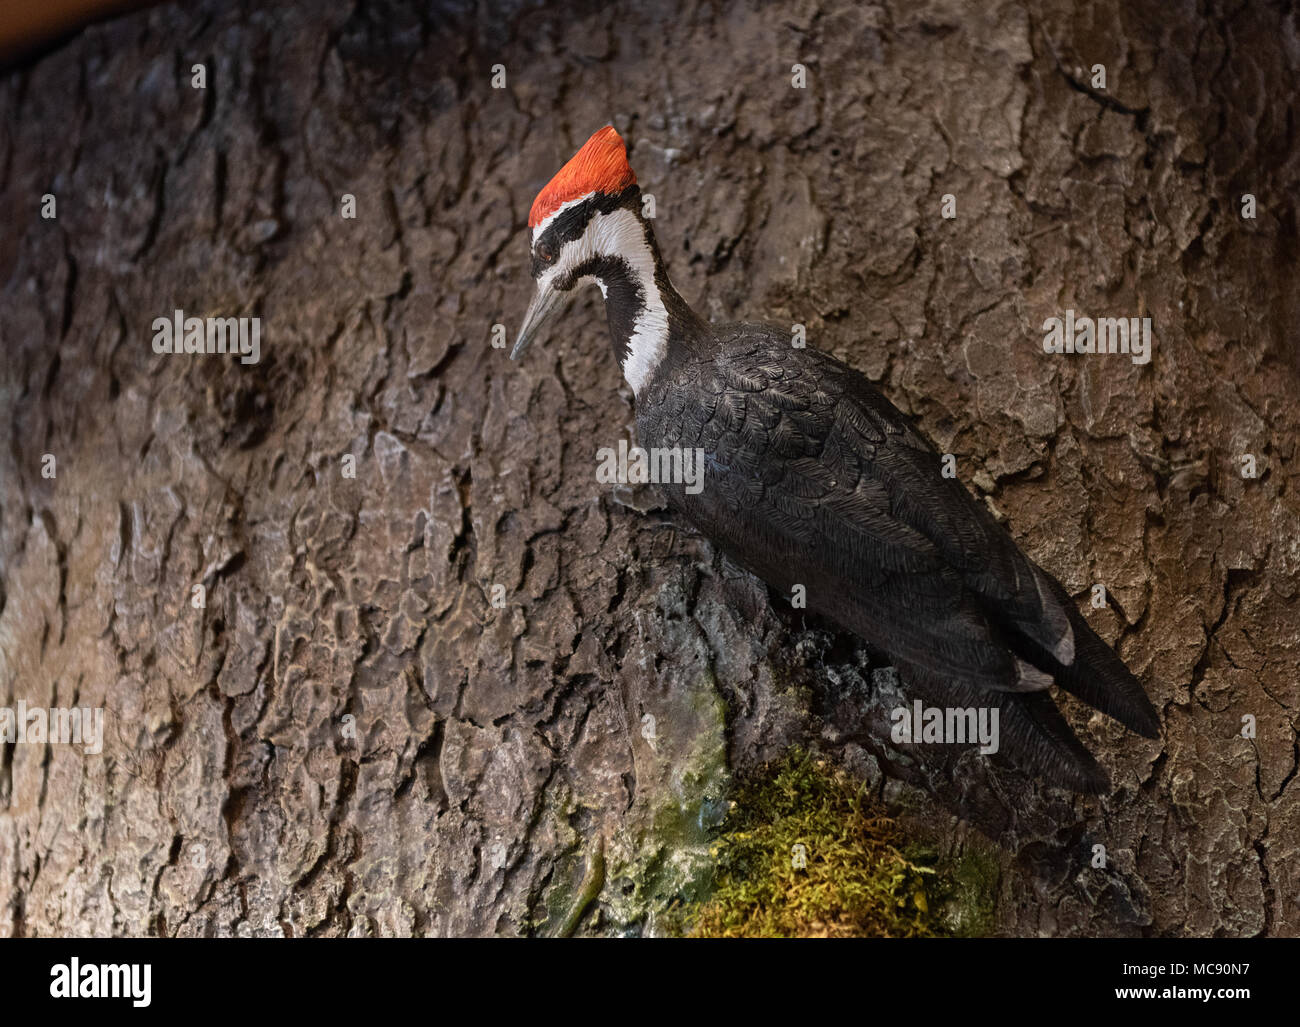 Lifelike model of Pileated Woodpecker perched on tree in nature exhibit at Mount Greylock Visitor Center in Lanesboro, MA. Stock Photo